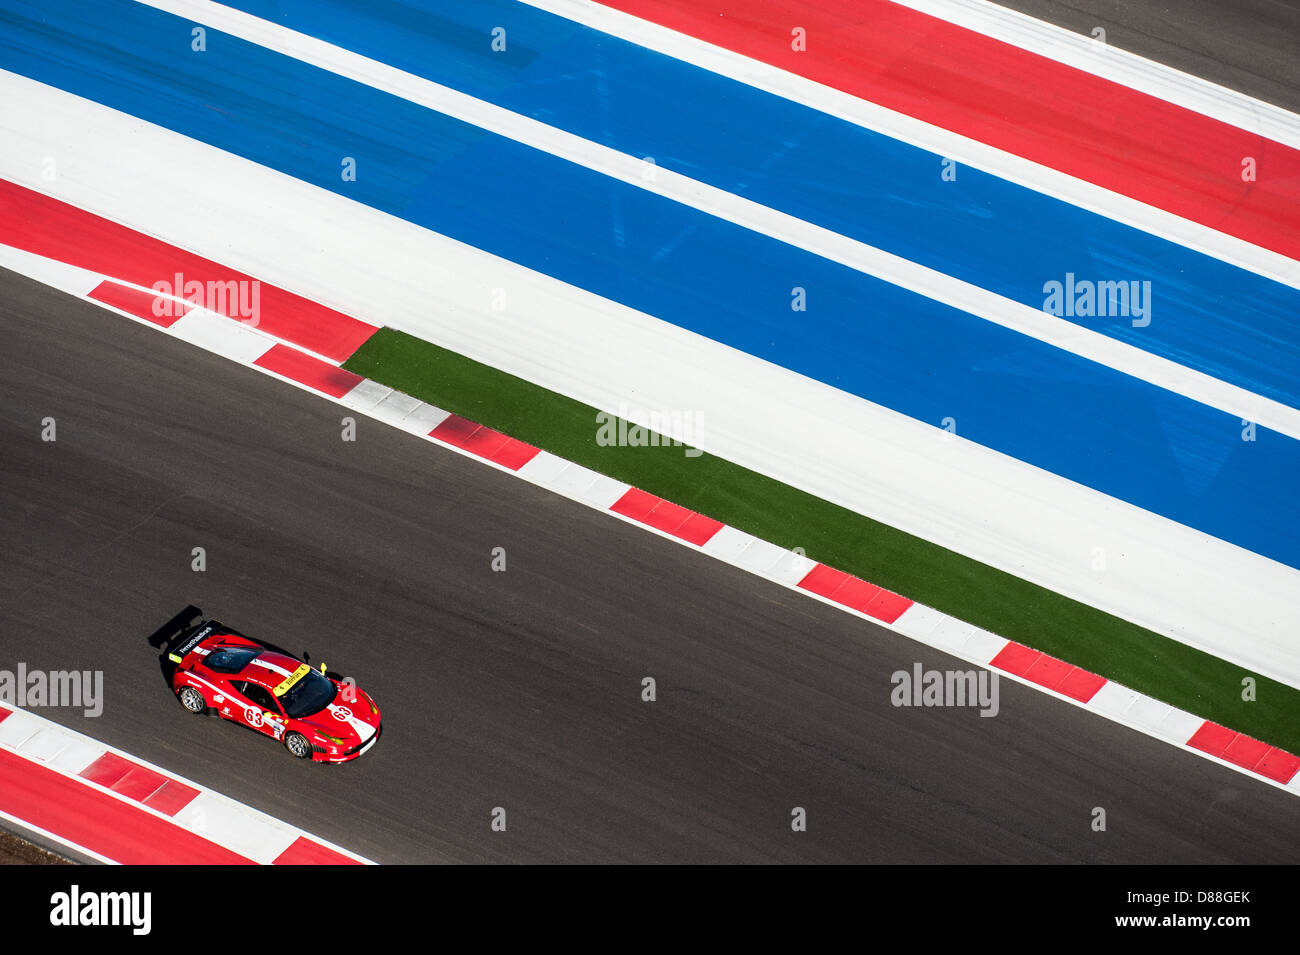 A Ferrari 458 races at Circuit of the Americas, Austin, Texas during Grand-Am racing weekend, March 2nd, 2013. Stock Photo